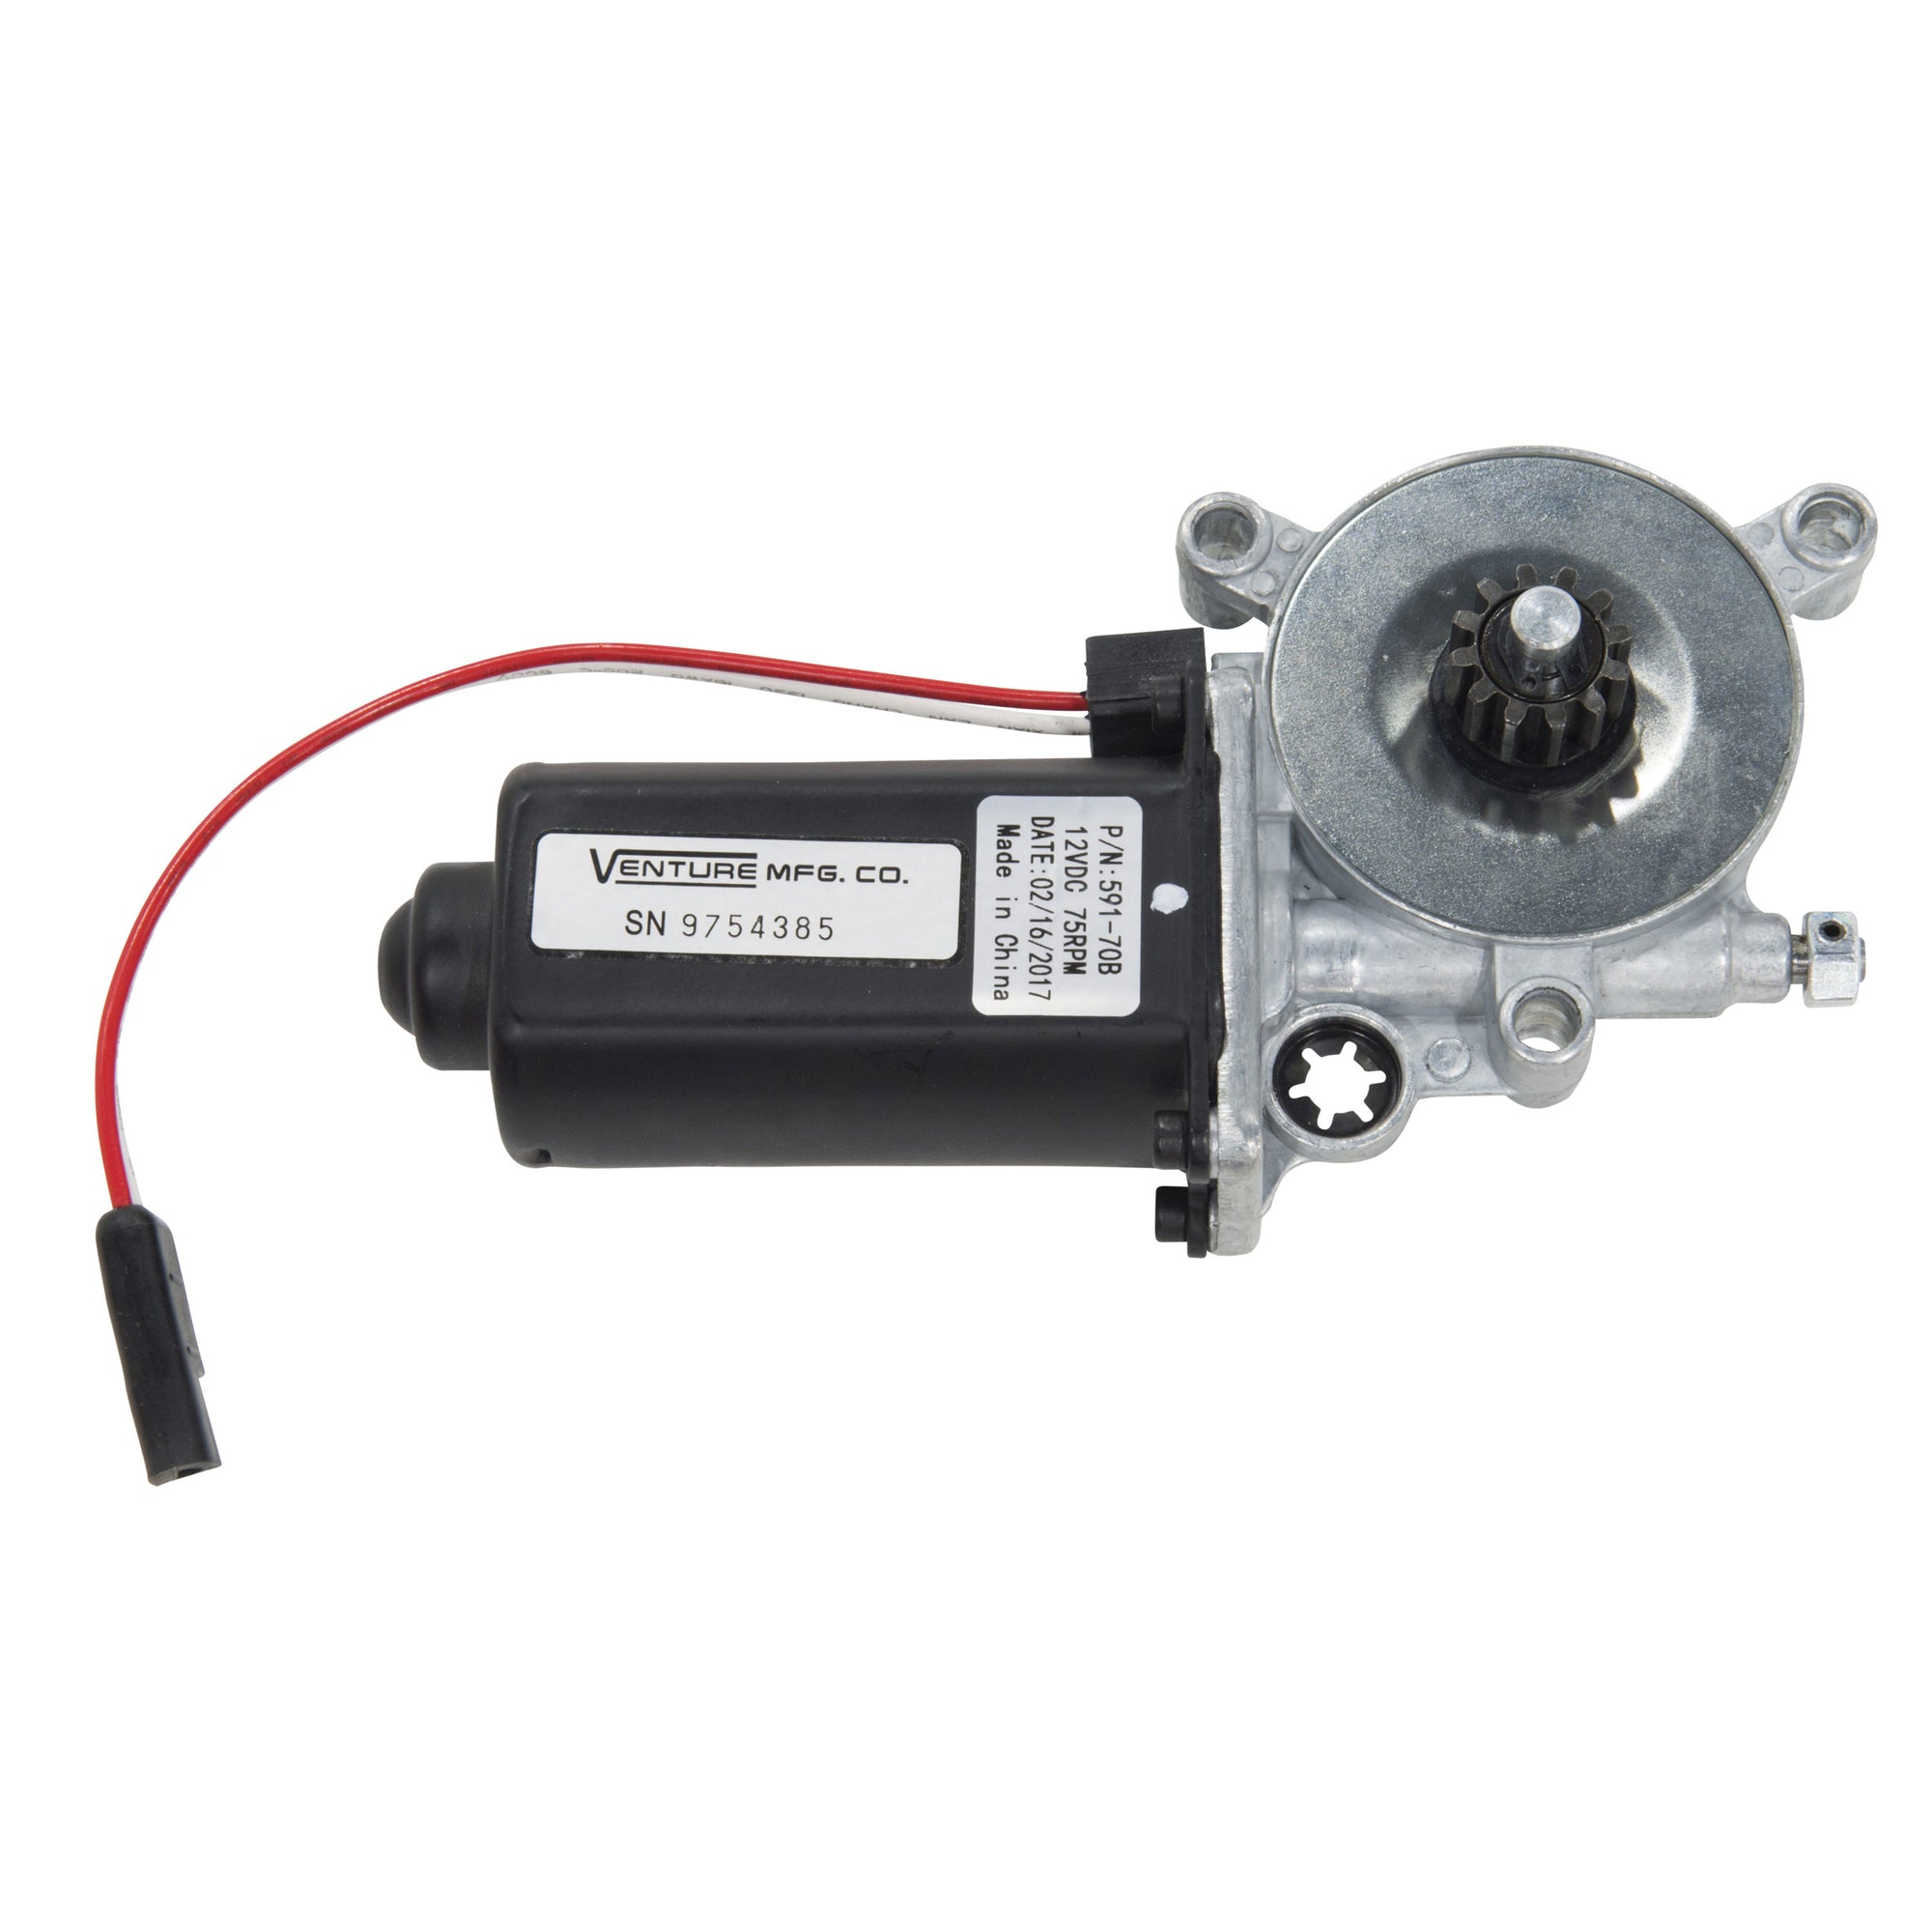 Lippert 723566 Replacement Awning Motor with Manual Override and 2-Way Connection